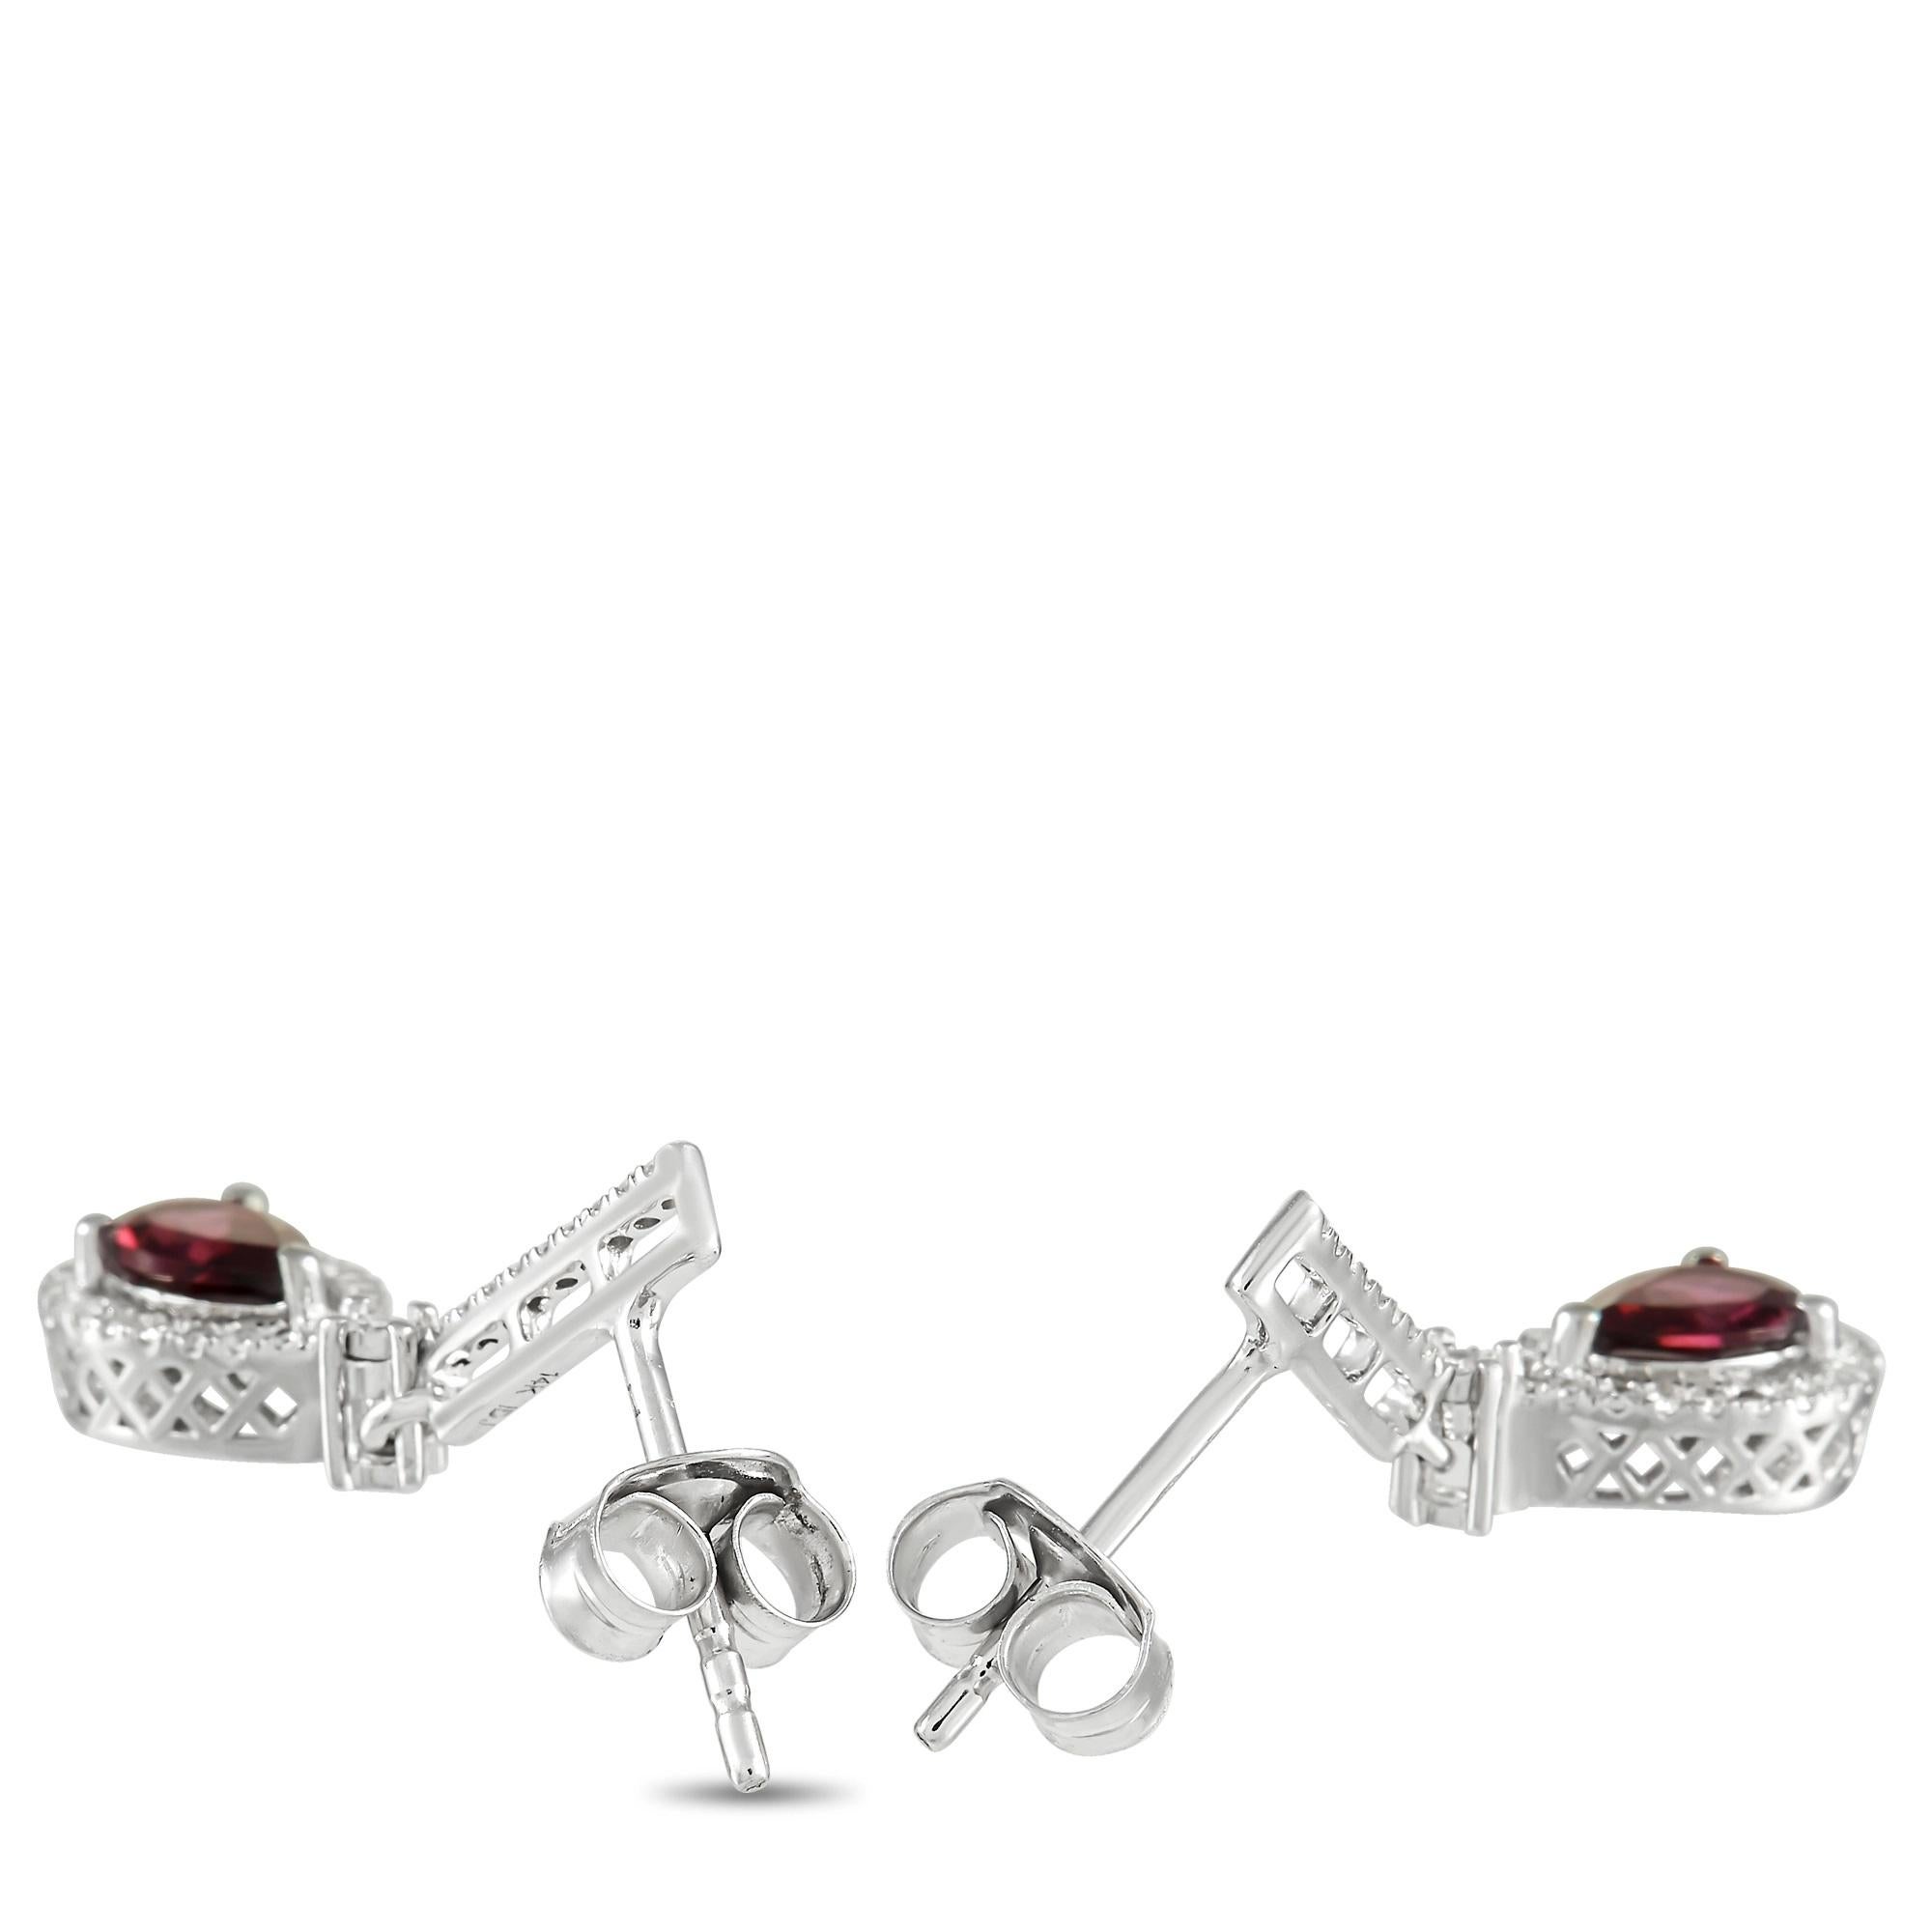 These gorgeous LB Exclusive earrings are a must-have. The pair is made with 14K White Gold and set with round-cut diamonds over the face of each earring, highlighting a beautiful pear-cut garnet stone set in the center of the drop. The earrings have